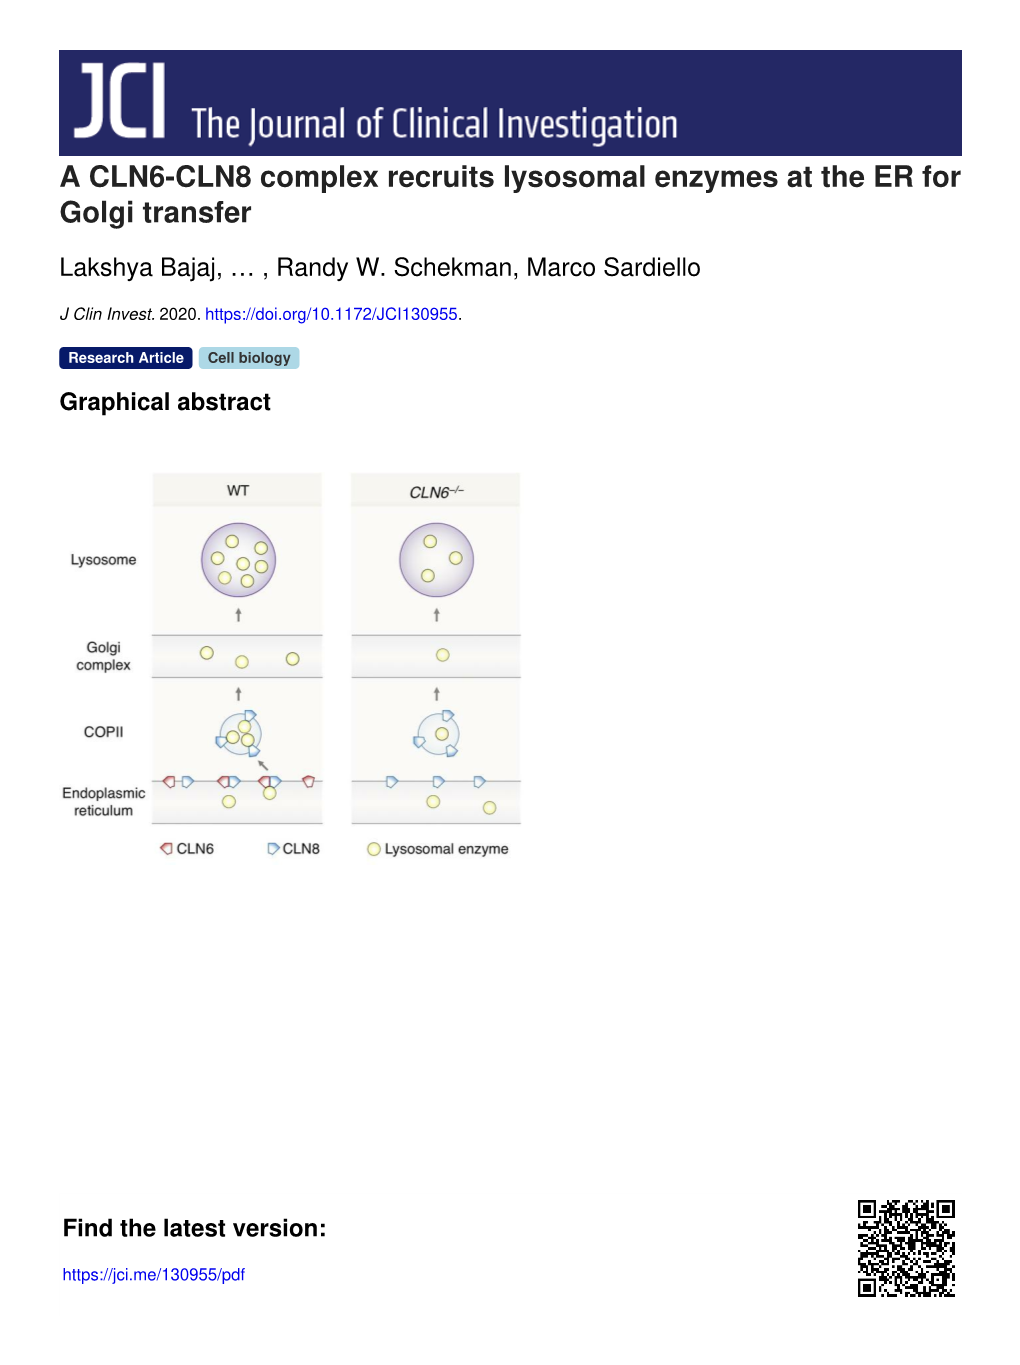 A CLN6-CLN8 Complex Recruits Lysosomal Enzymes at the ER for Golgi Transfer